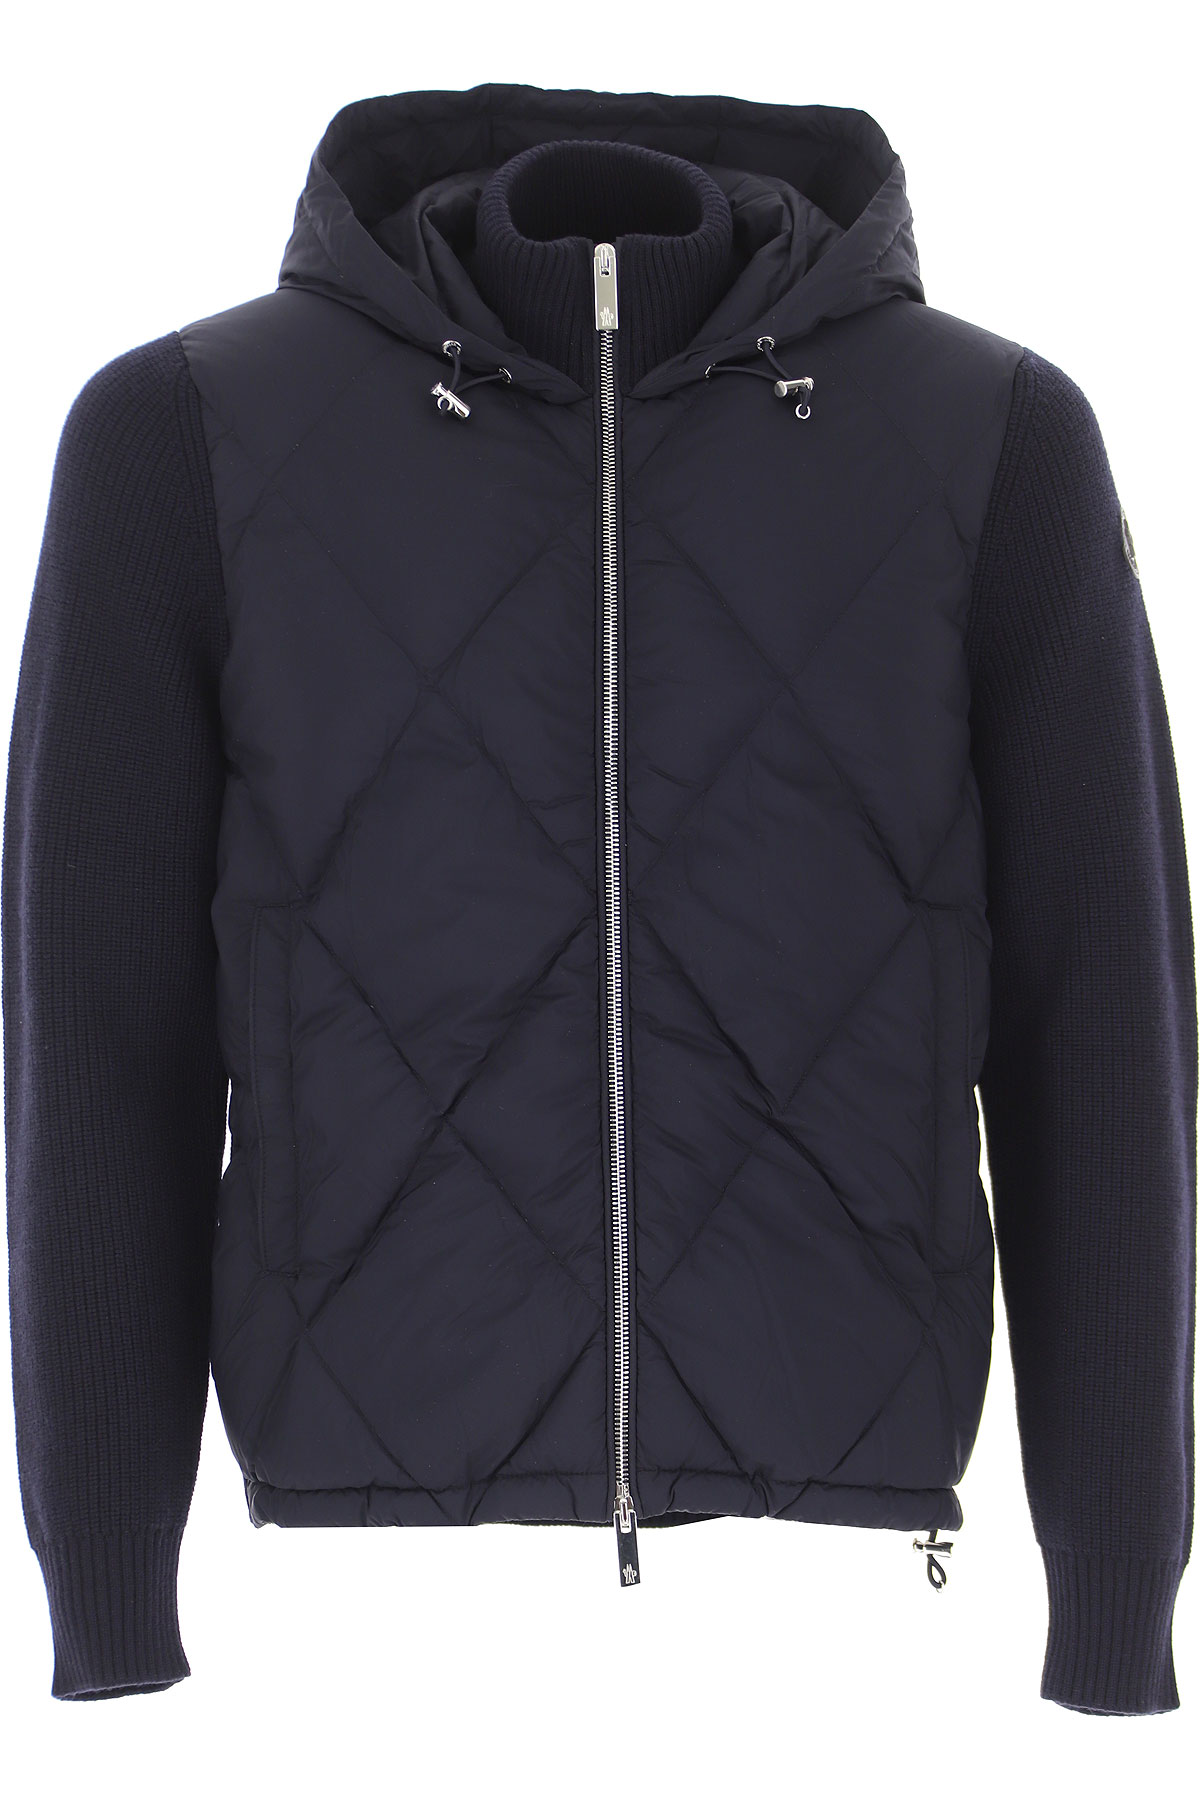 Mens Clothing Moncler, Style code: 9b51400-a9418-742